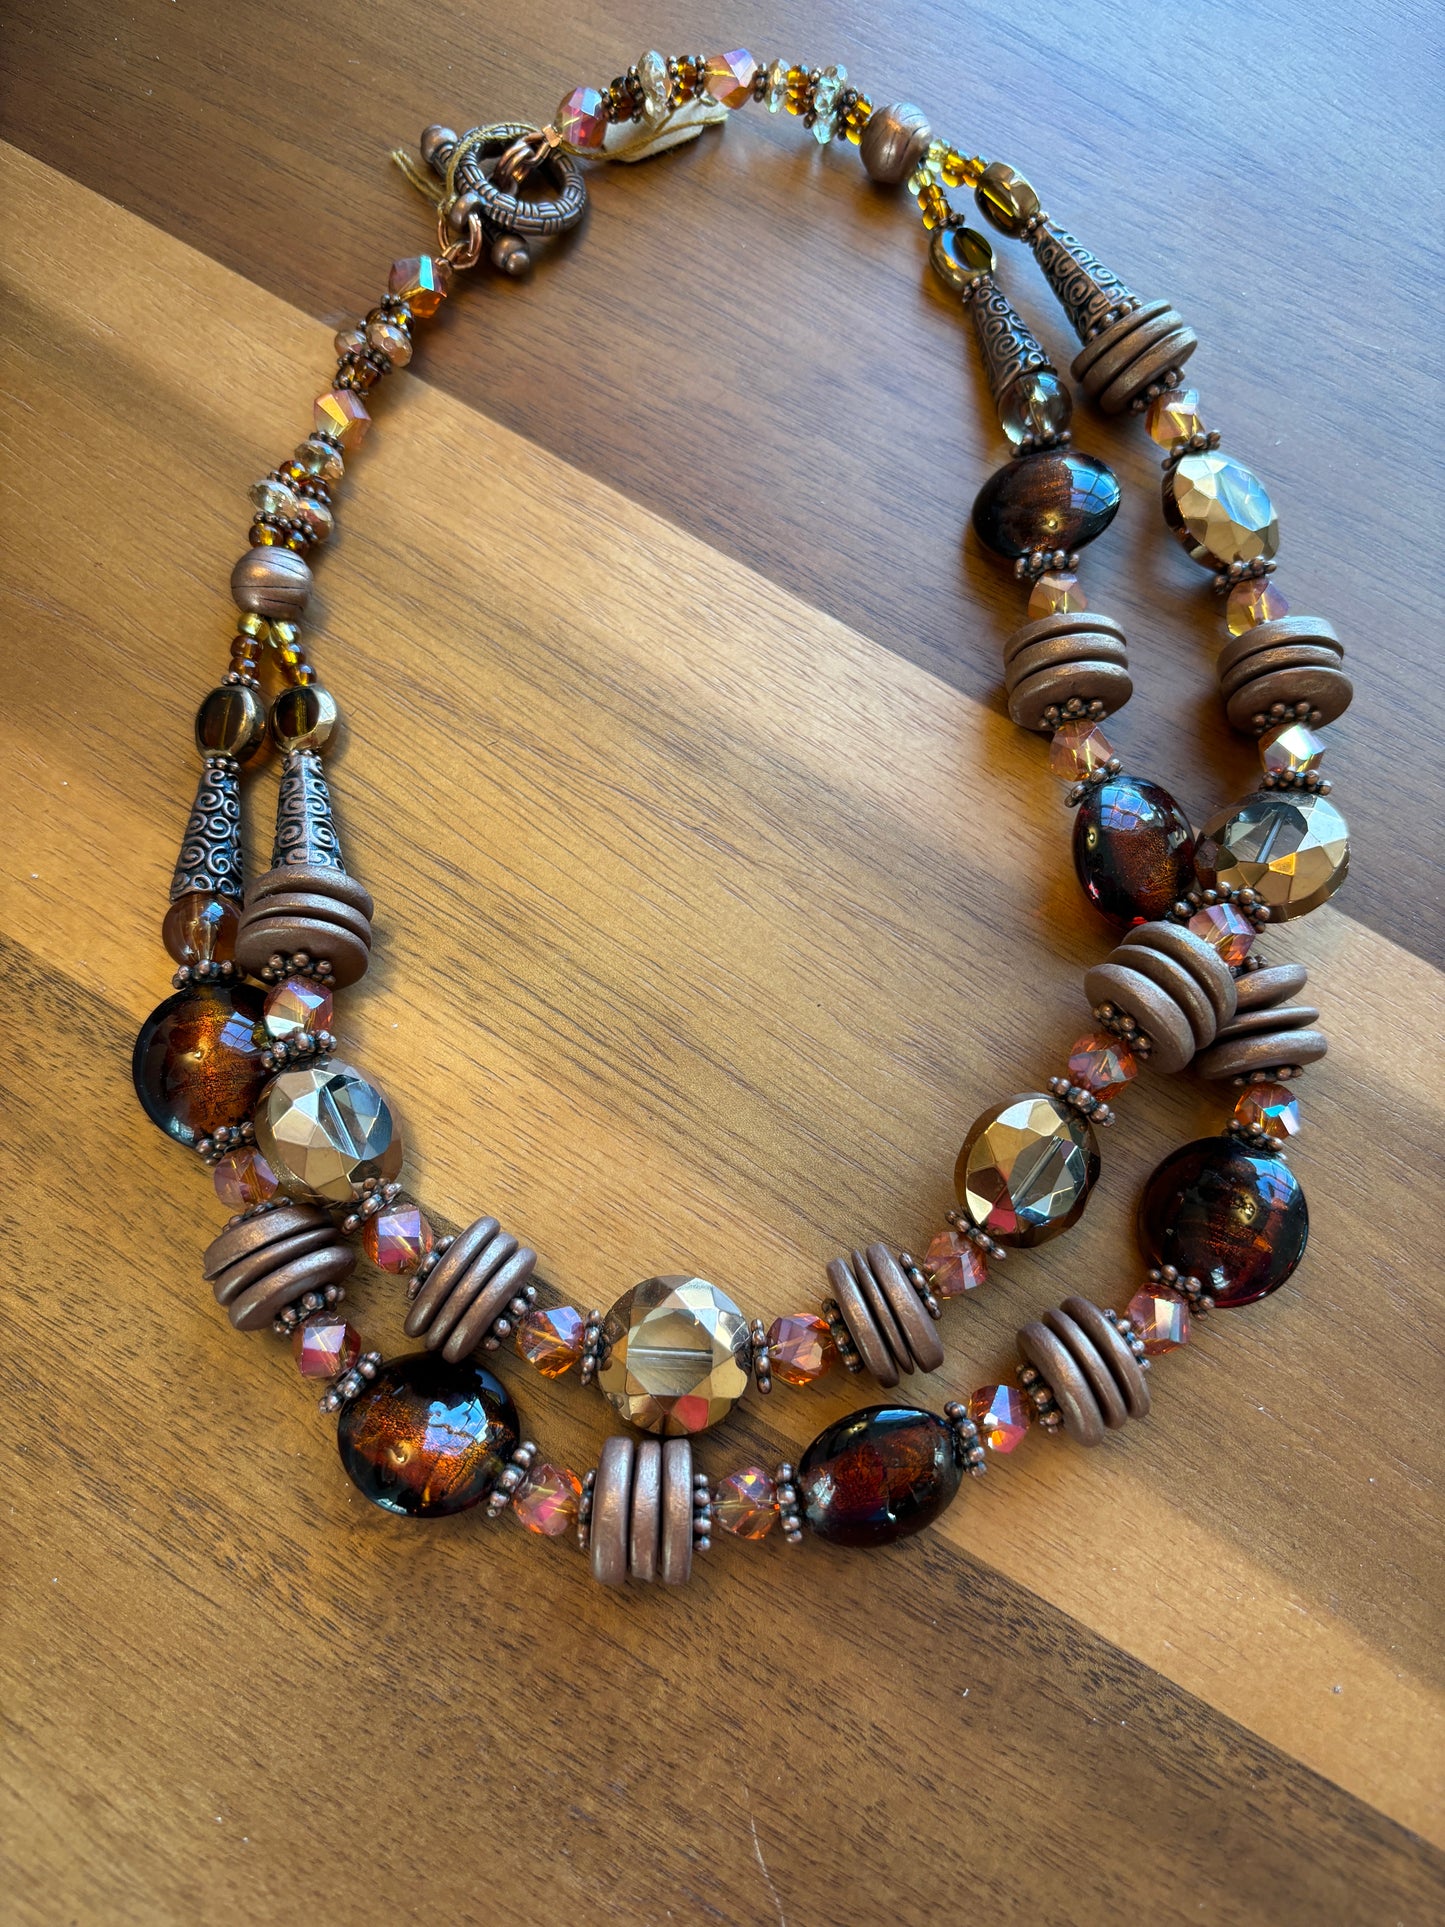 Fire and Ice Double Strand Layered Bib Necklace 19", Amber Glass, Copper and Wood, SALE!